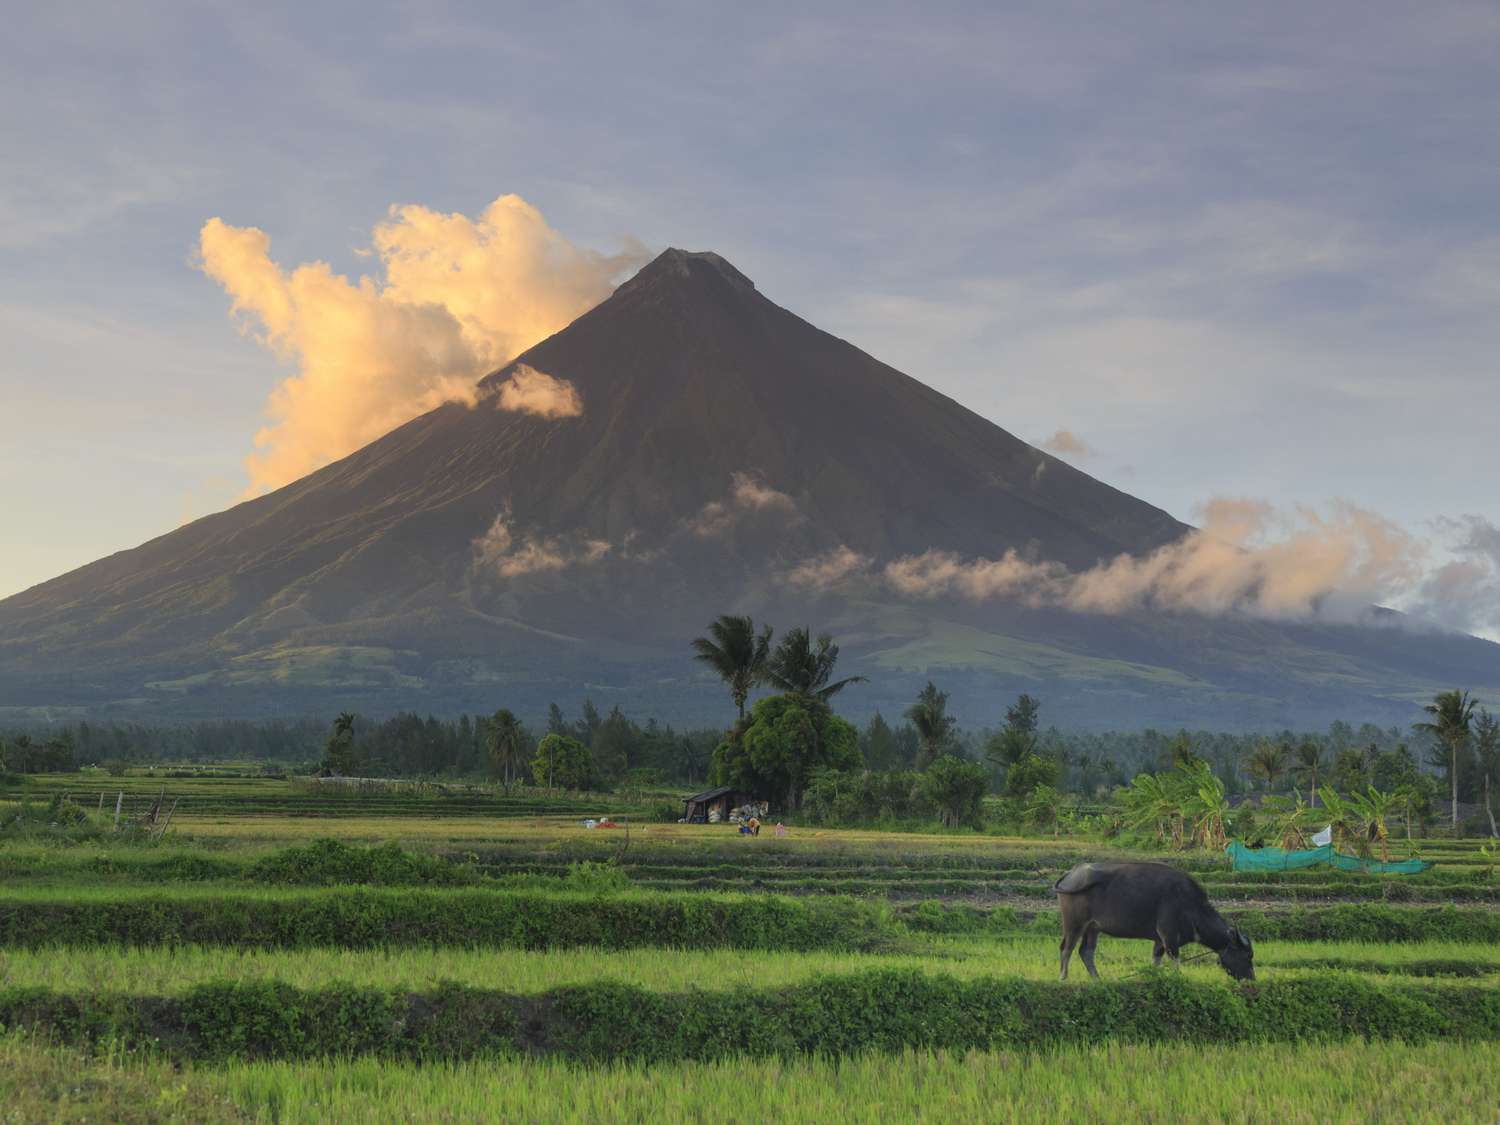 a water buffalo (carabao) in front of a volcano in the Philippines